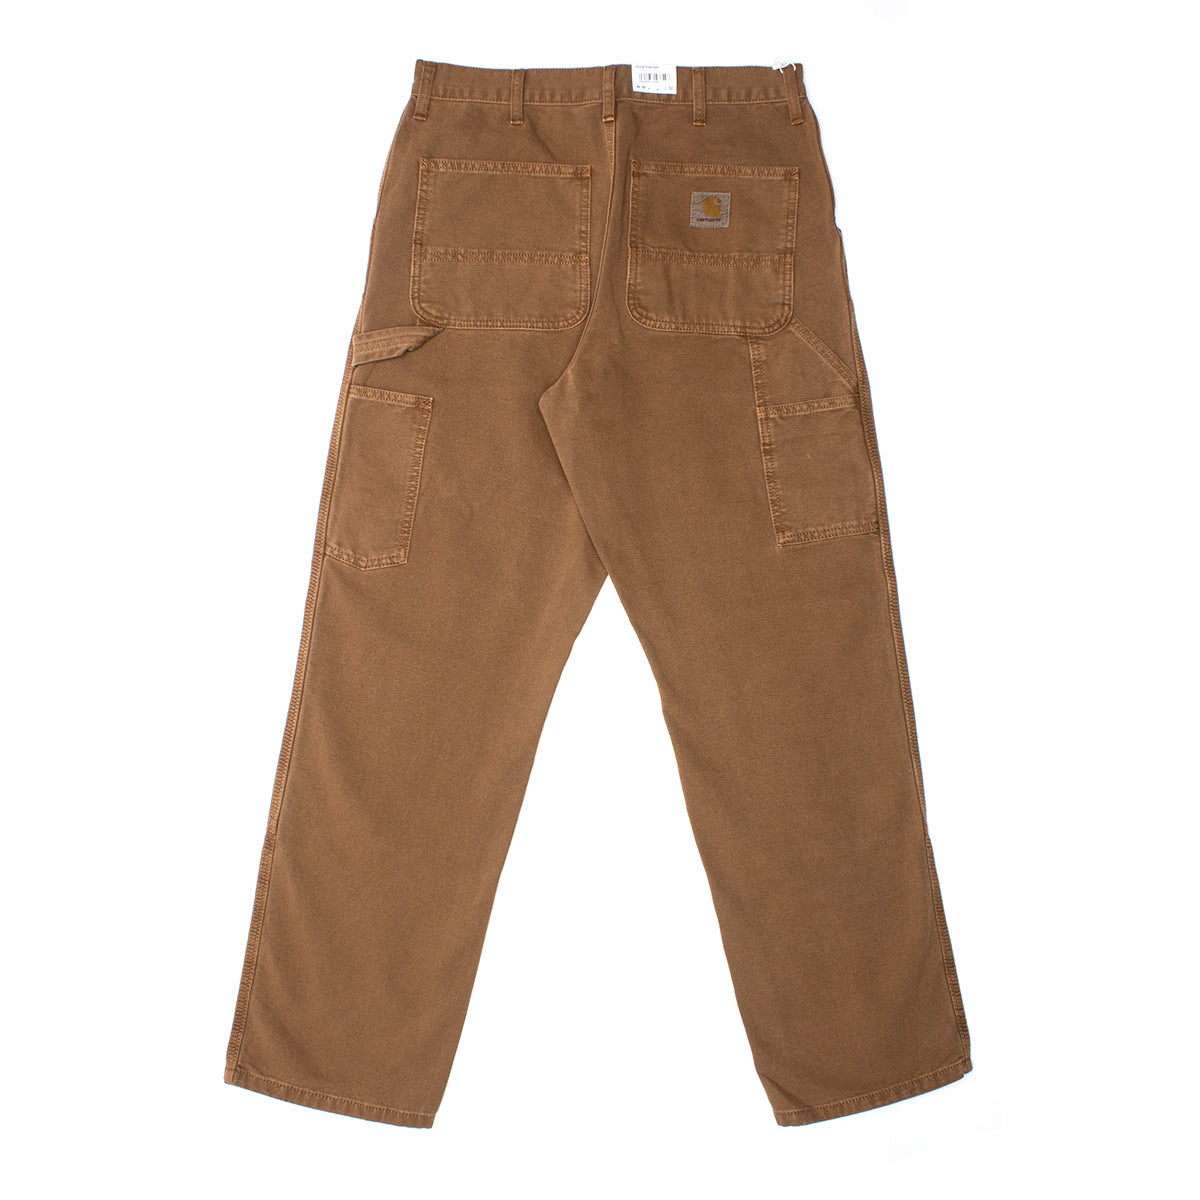 Carhartt WIP | Double Knee Pant Style # I029196-1CNFH Color : Tamarind